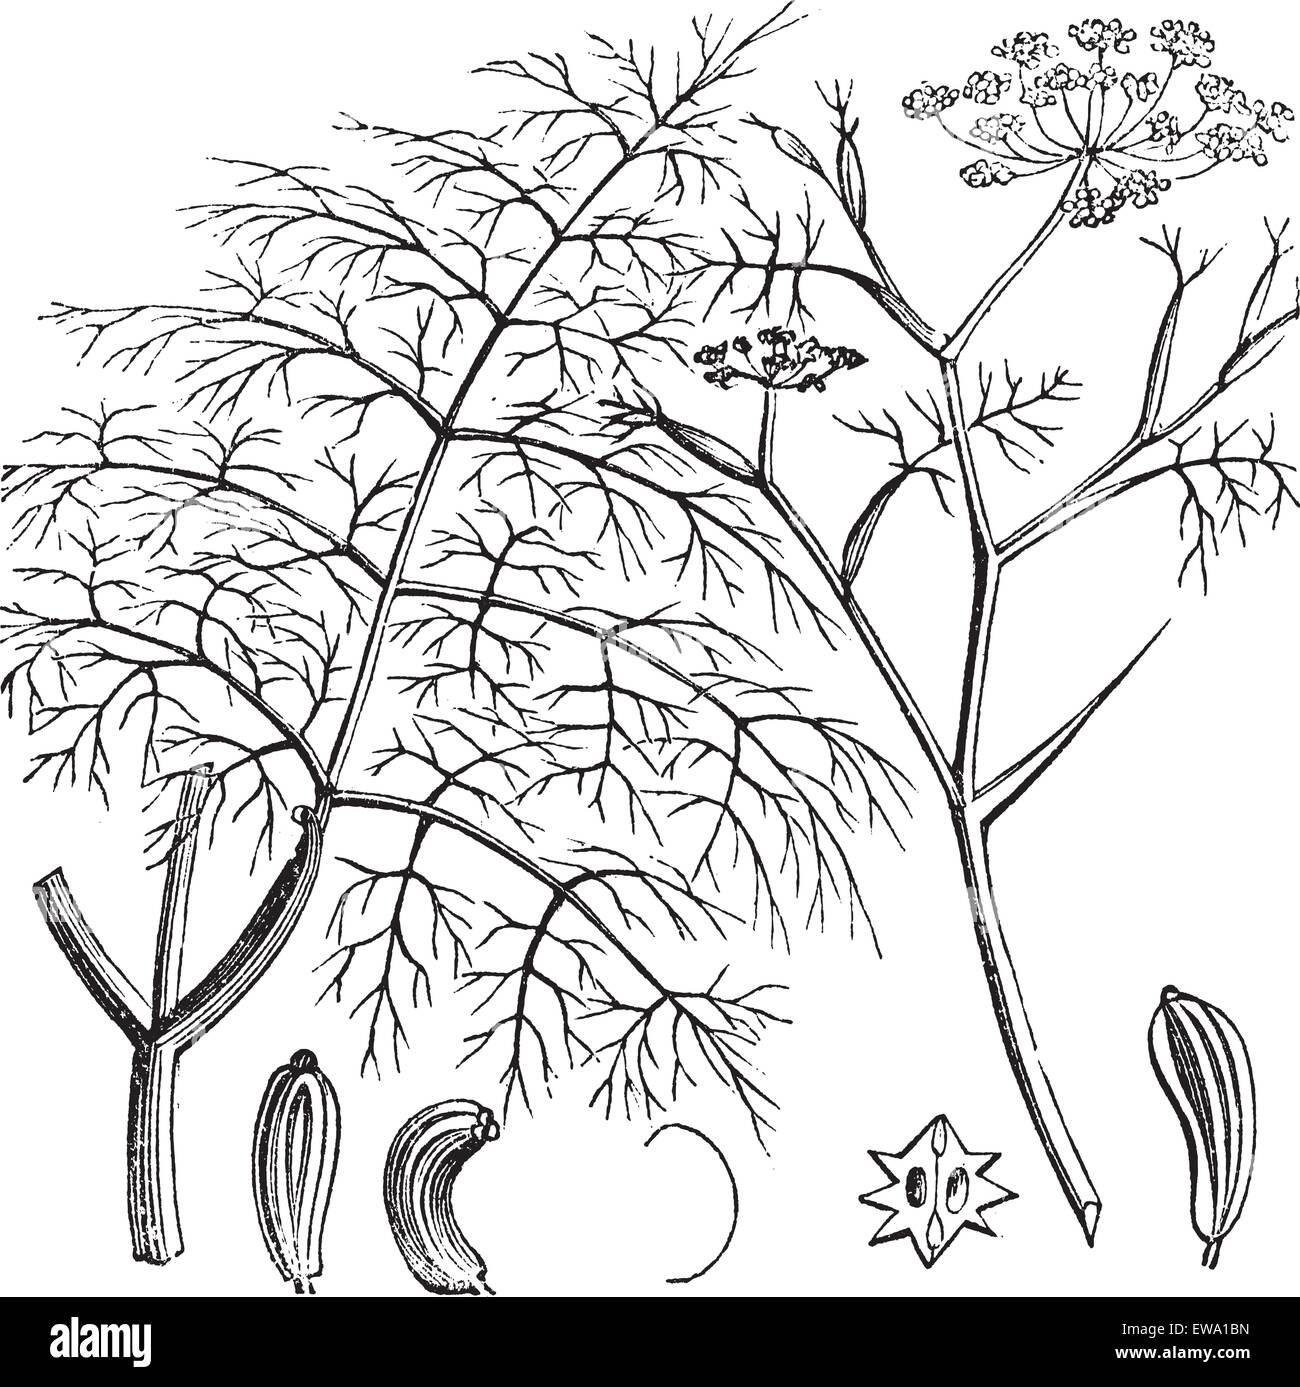 Common Fennel or Foeniculum vulgare, vintage engraving. Old engraved illustration of a Common Fennel showing seeds (bottom). Stock Vector